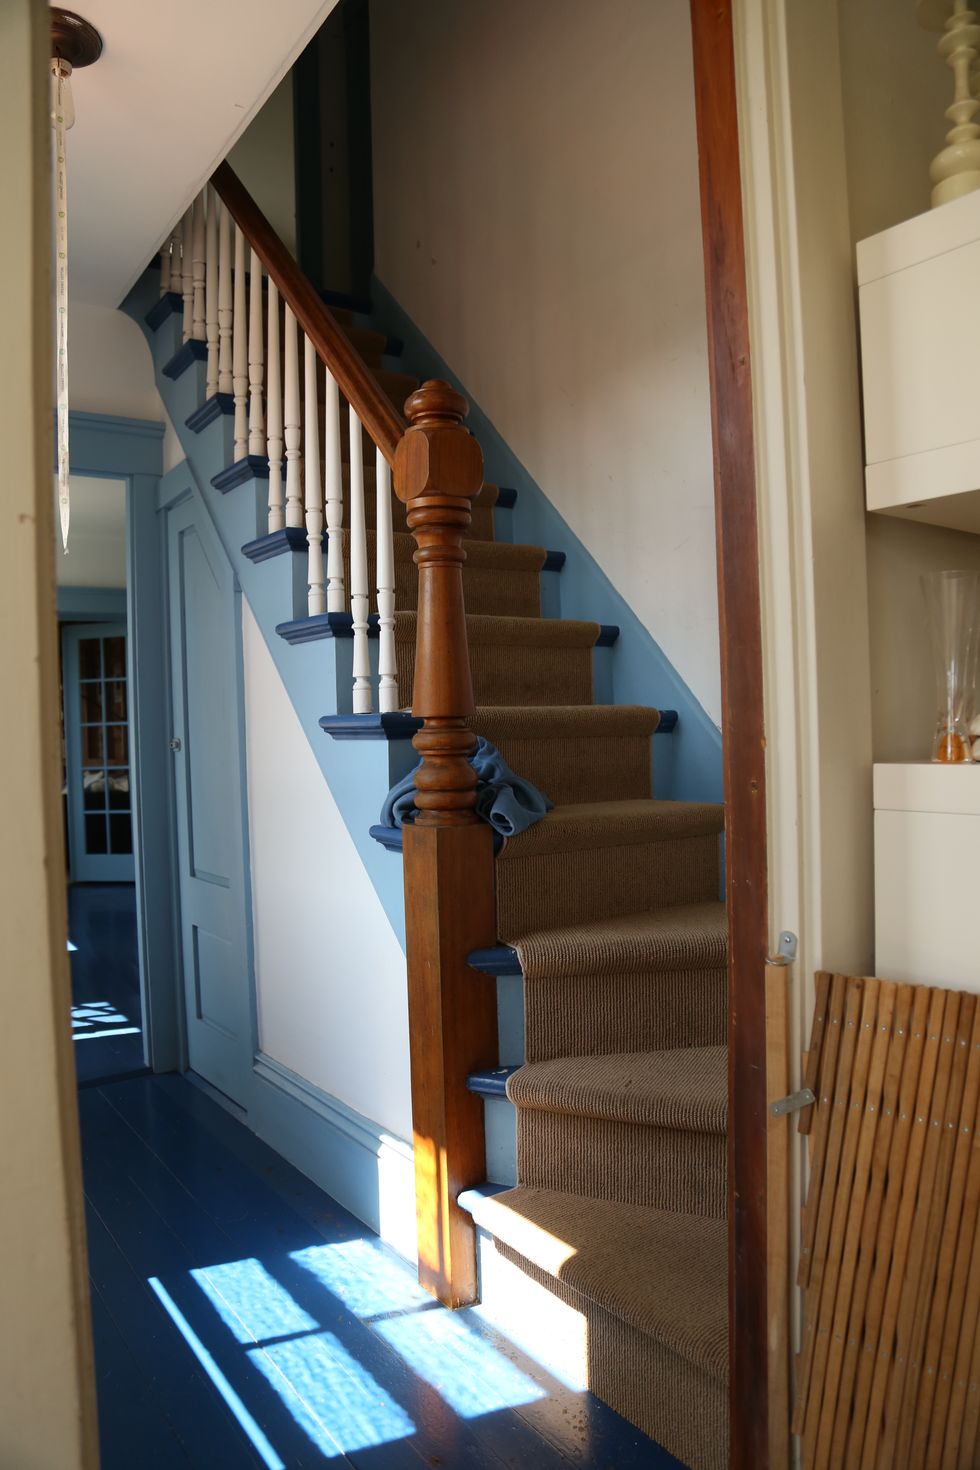 Stairs, Handrail, Property, Baluster, House, Architecture, Home, Building, Room, Hardwood, 